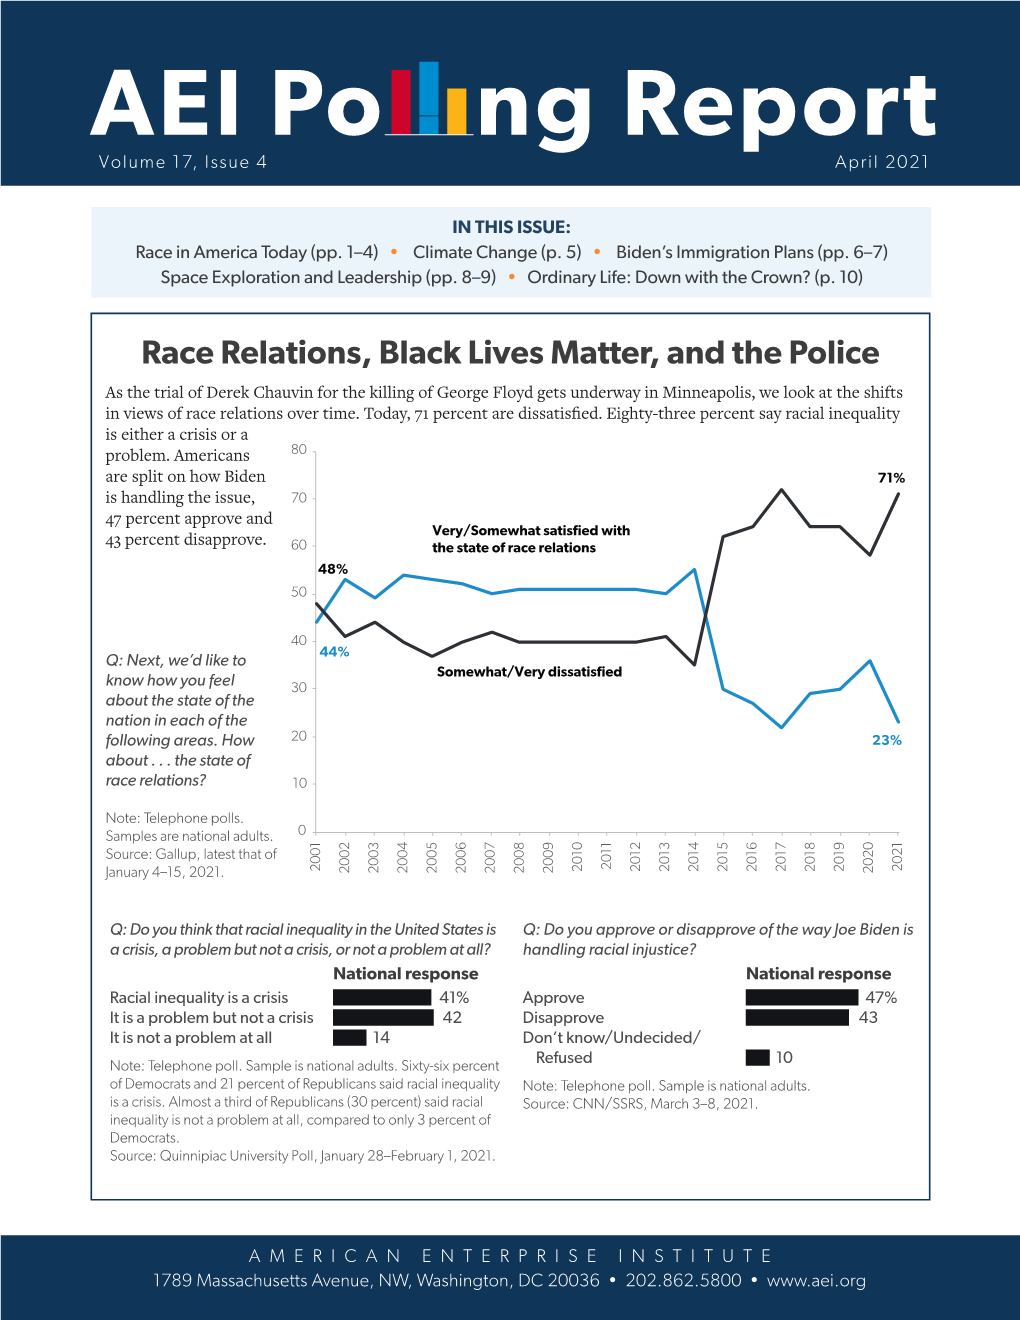 Race Relations, Black Lives Matter, and the Police